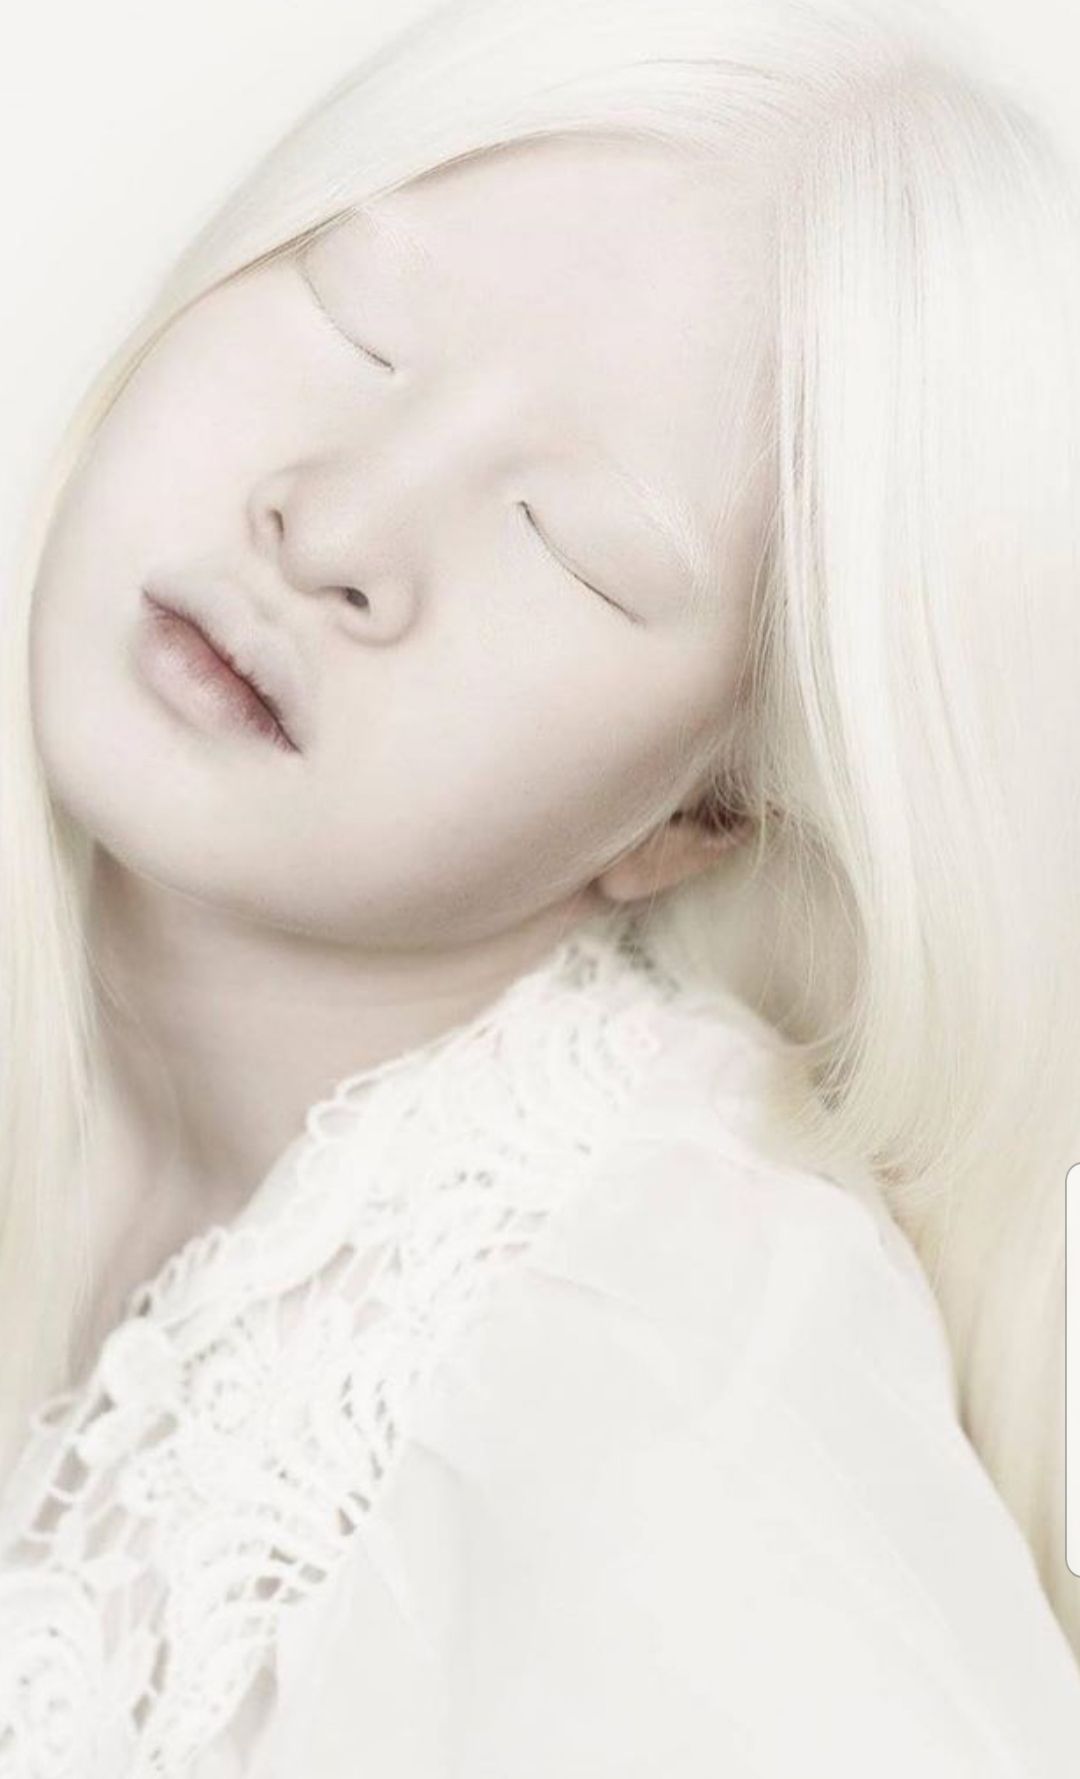 Albino girl who was abandoned by her parents becomes a top model, see photos.